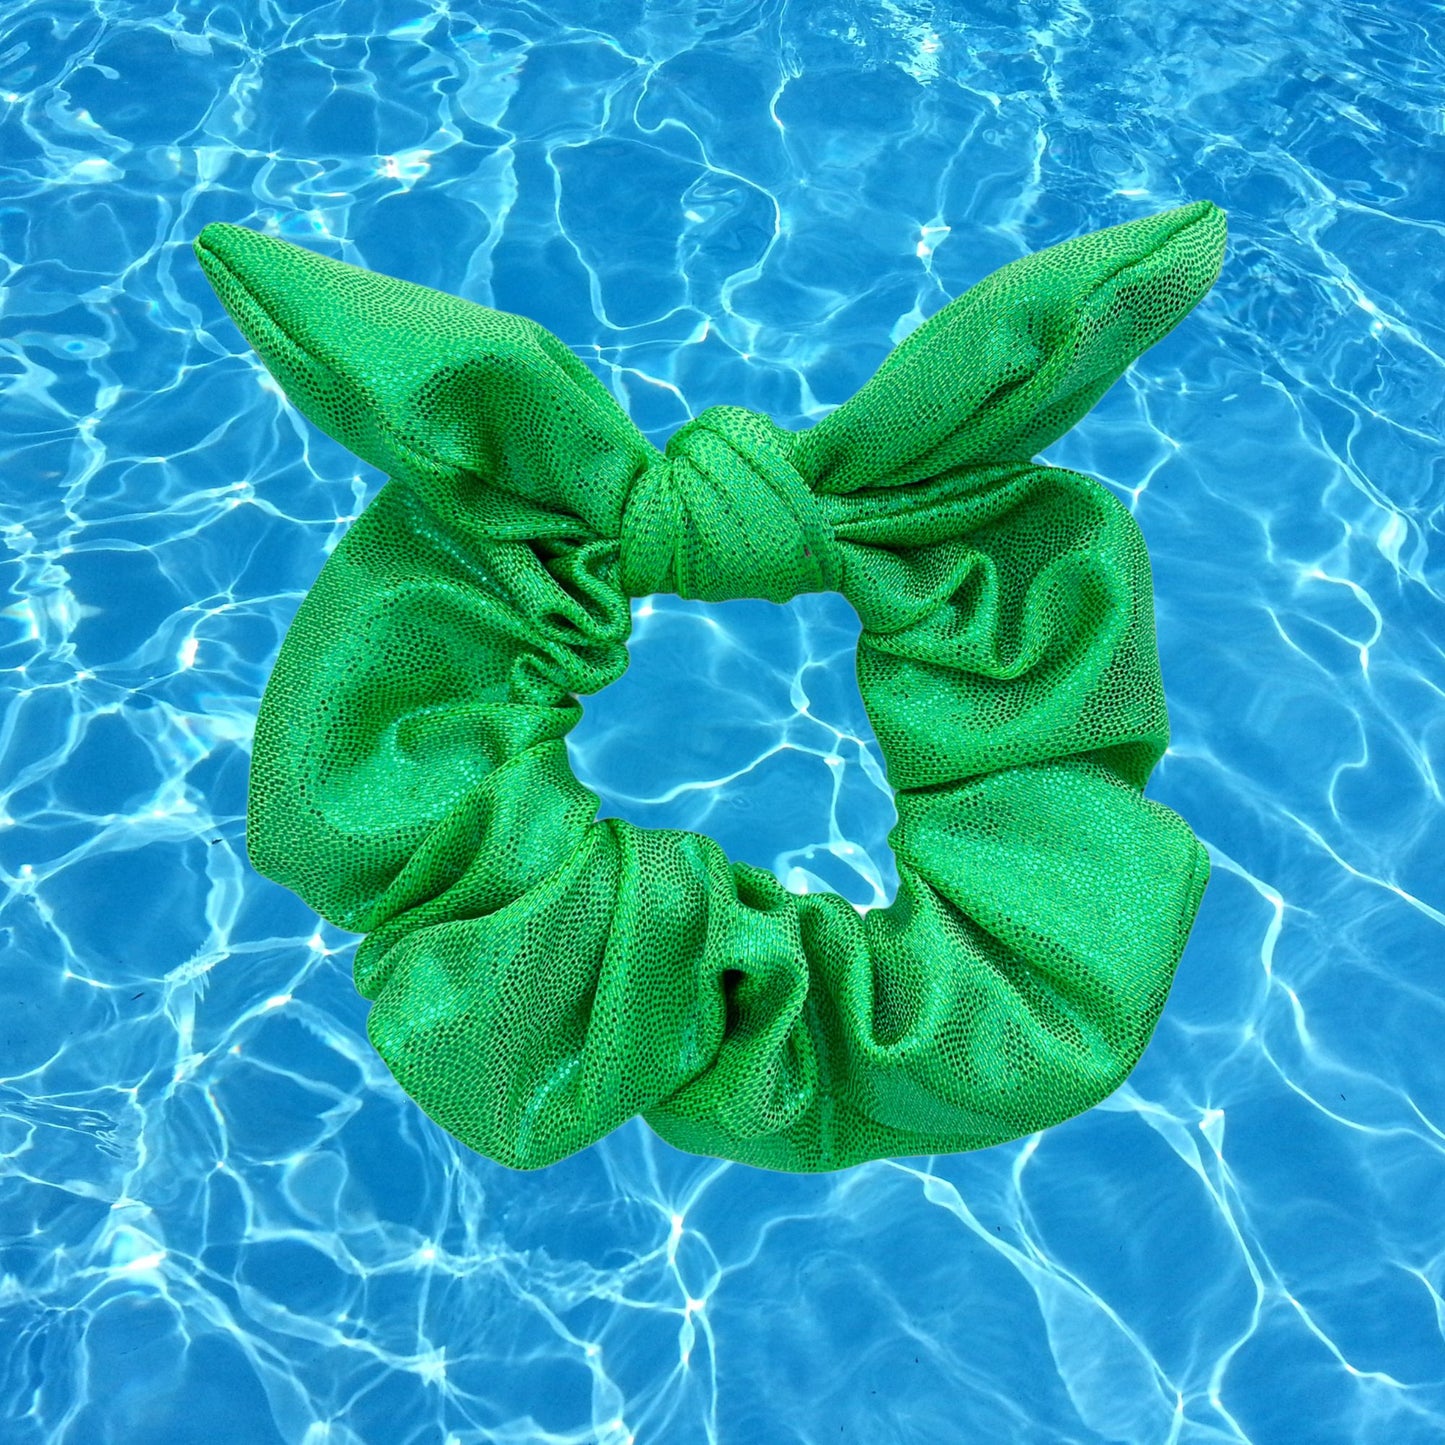 Green Holographic Scrunchie - PREORDER